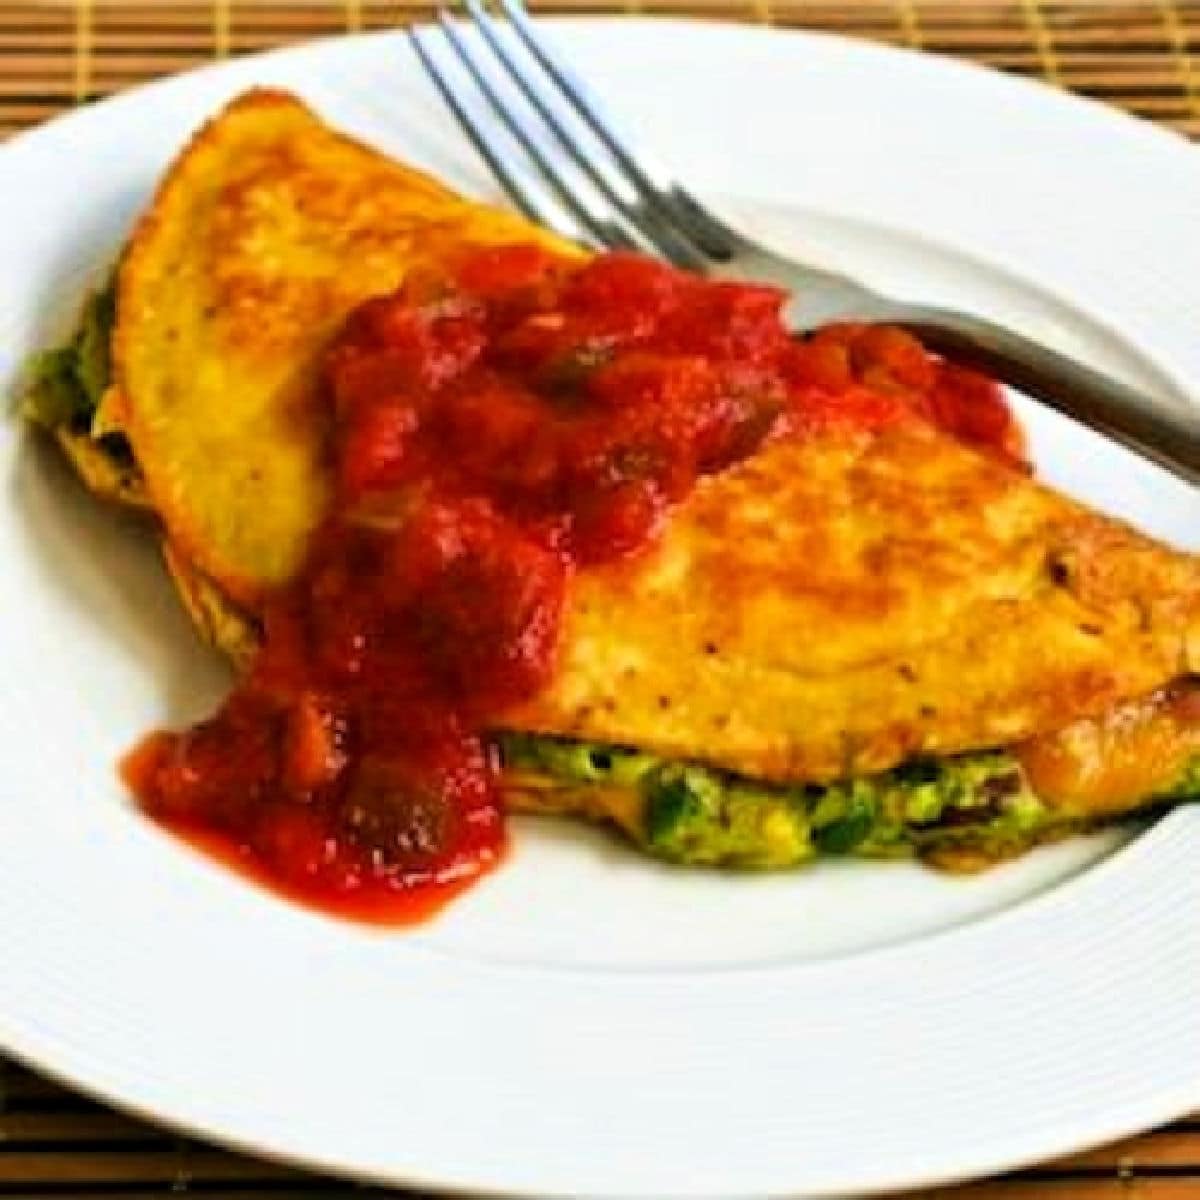 Square image for Southwestern Omelet shown on plate with Guacamole and Salsa.